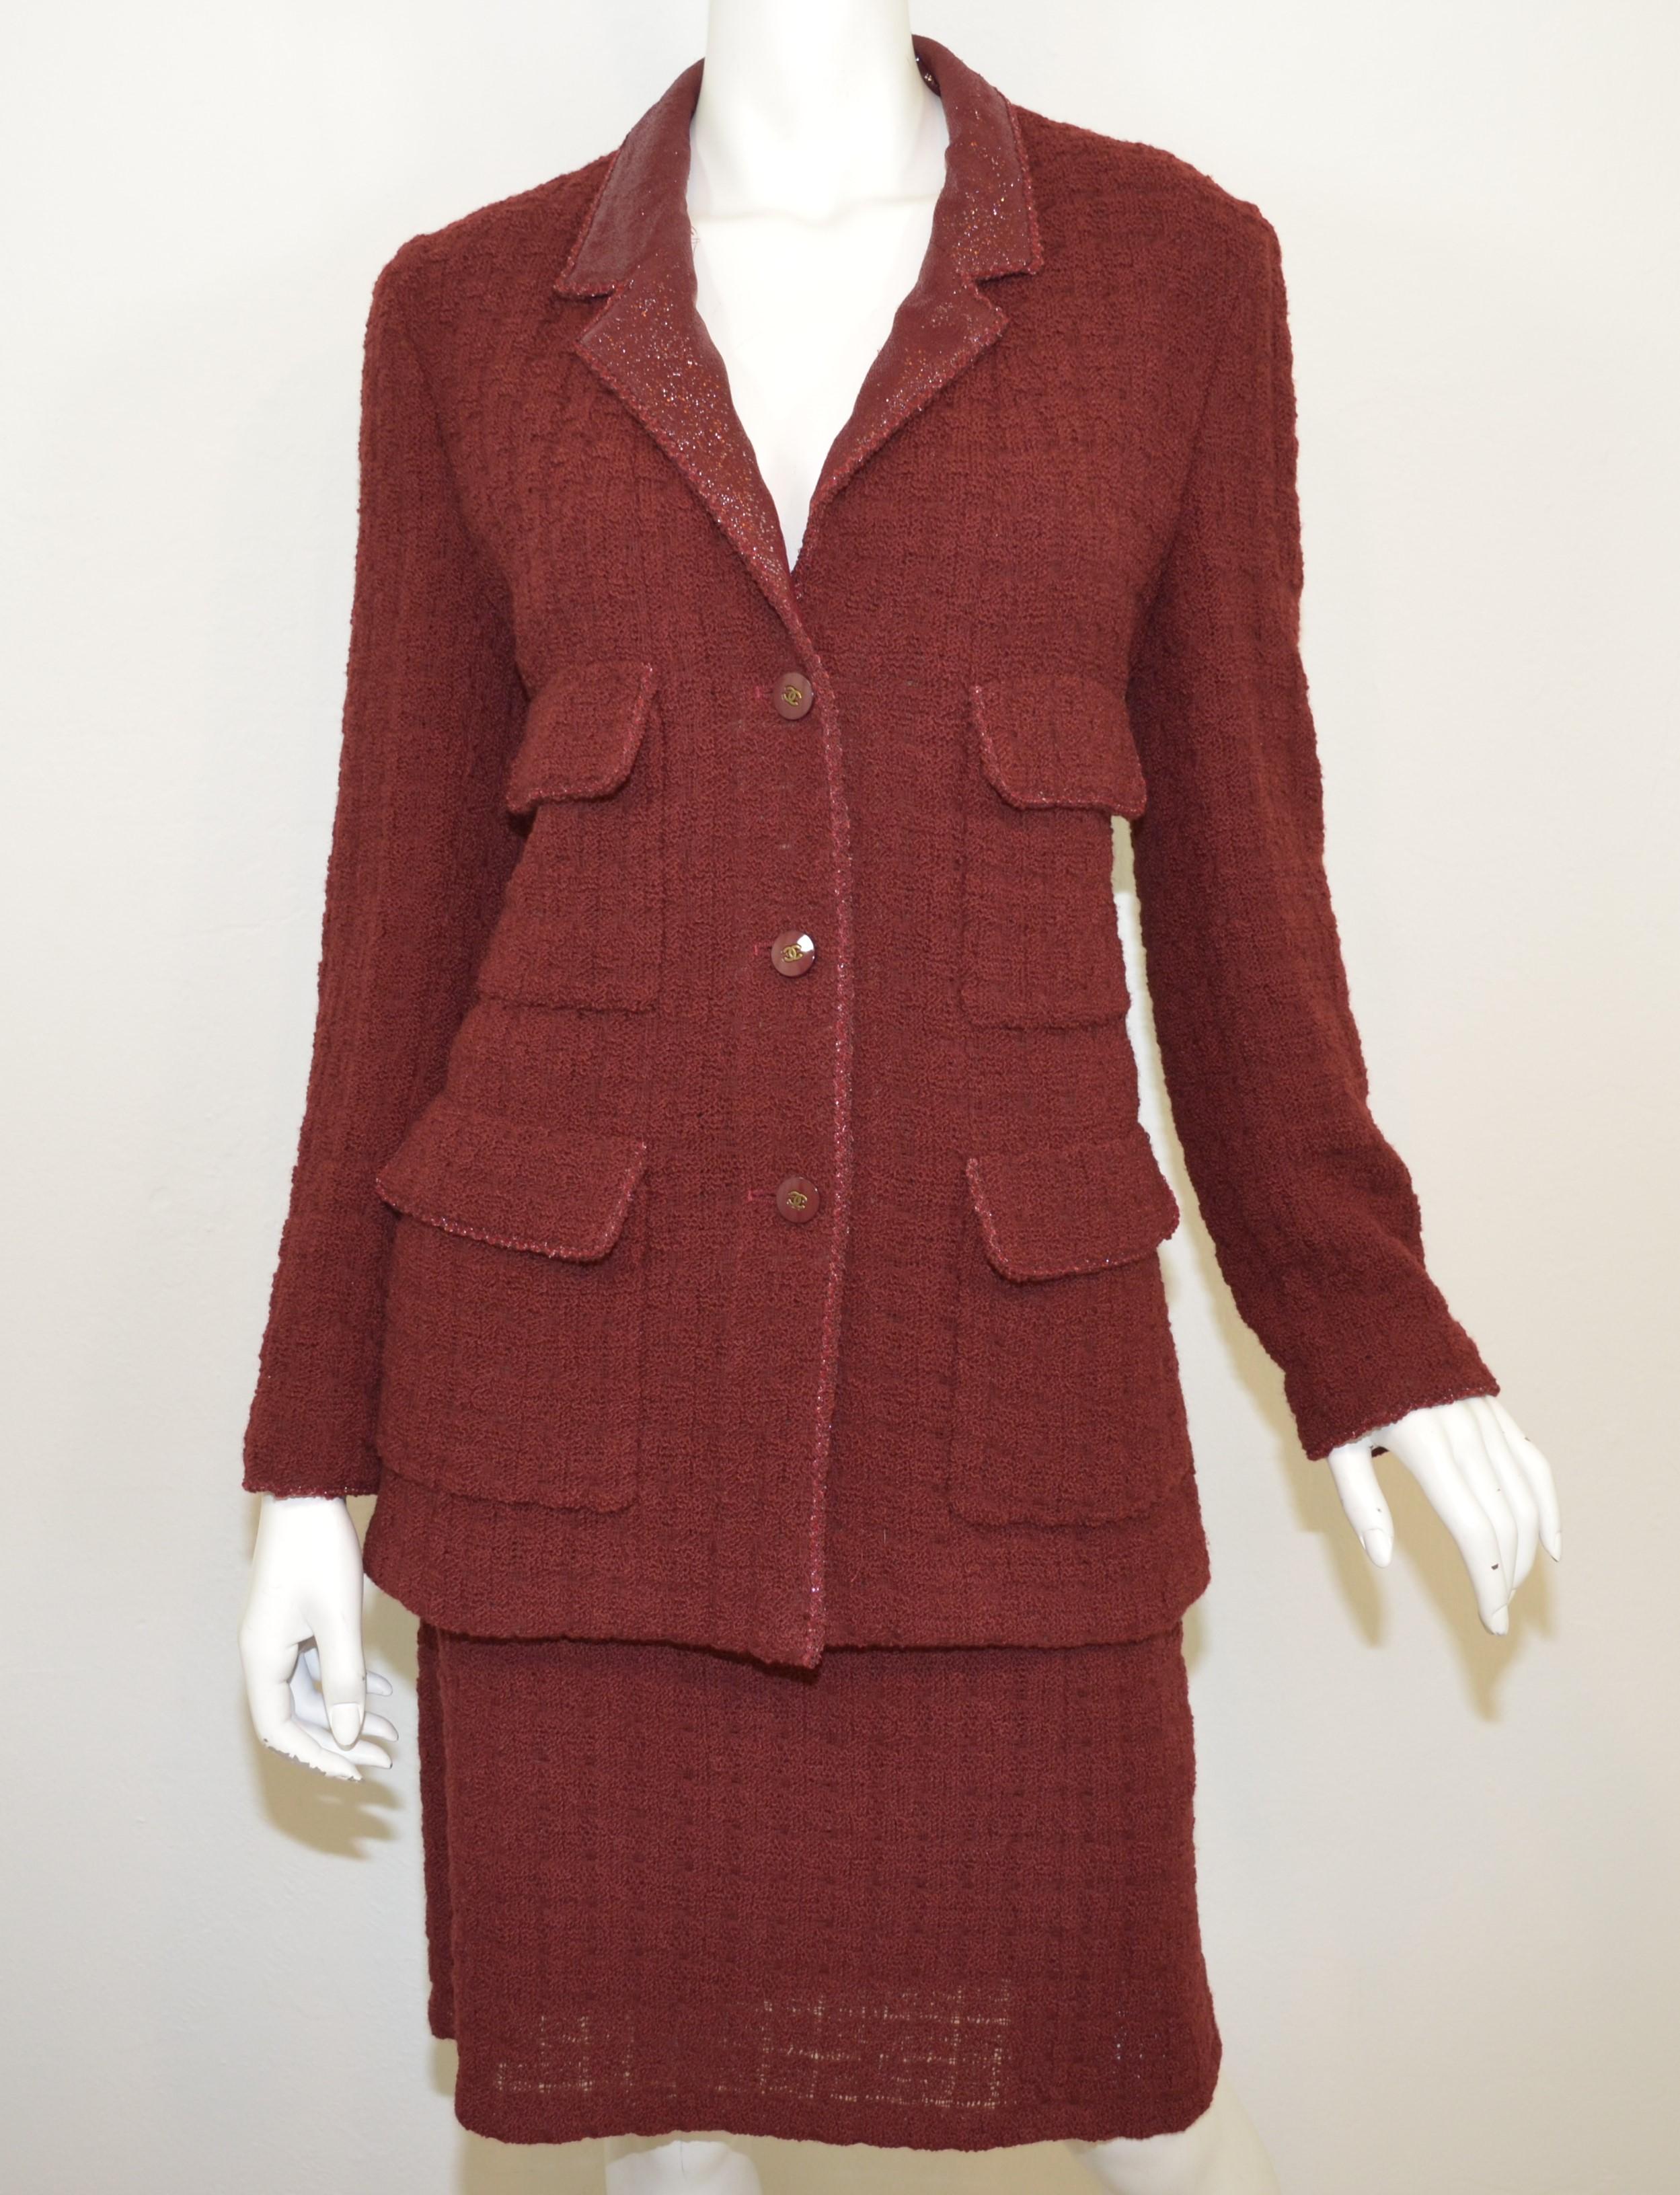 Chanel knitted jacket and skirt set from the 1998 Autumn collection is featured in a maroon color with a shimmering collar and lining to the jacket — Jacket has button closures along the front and along the cuffs of the sleeves. Skirt has a back